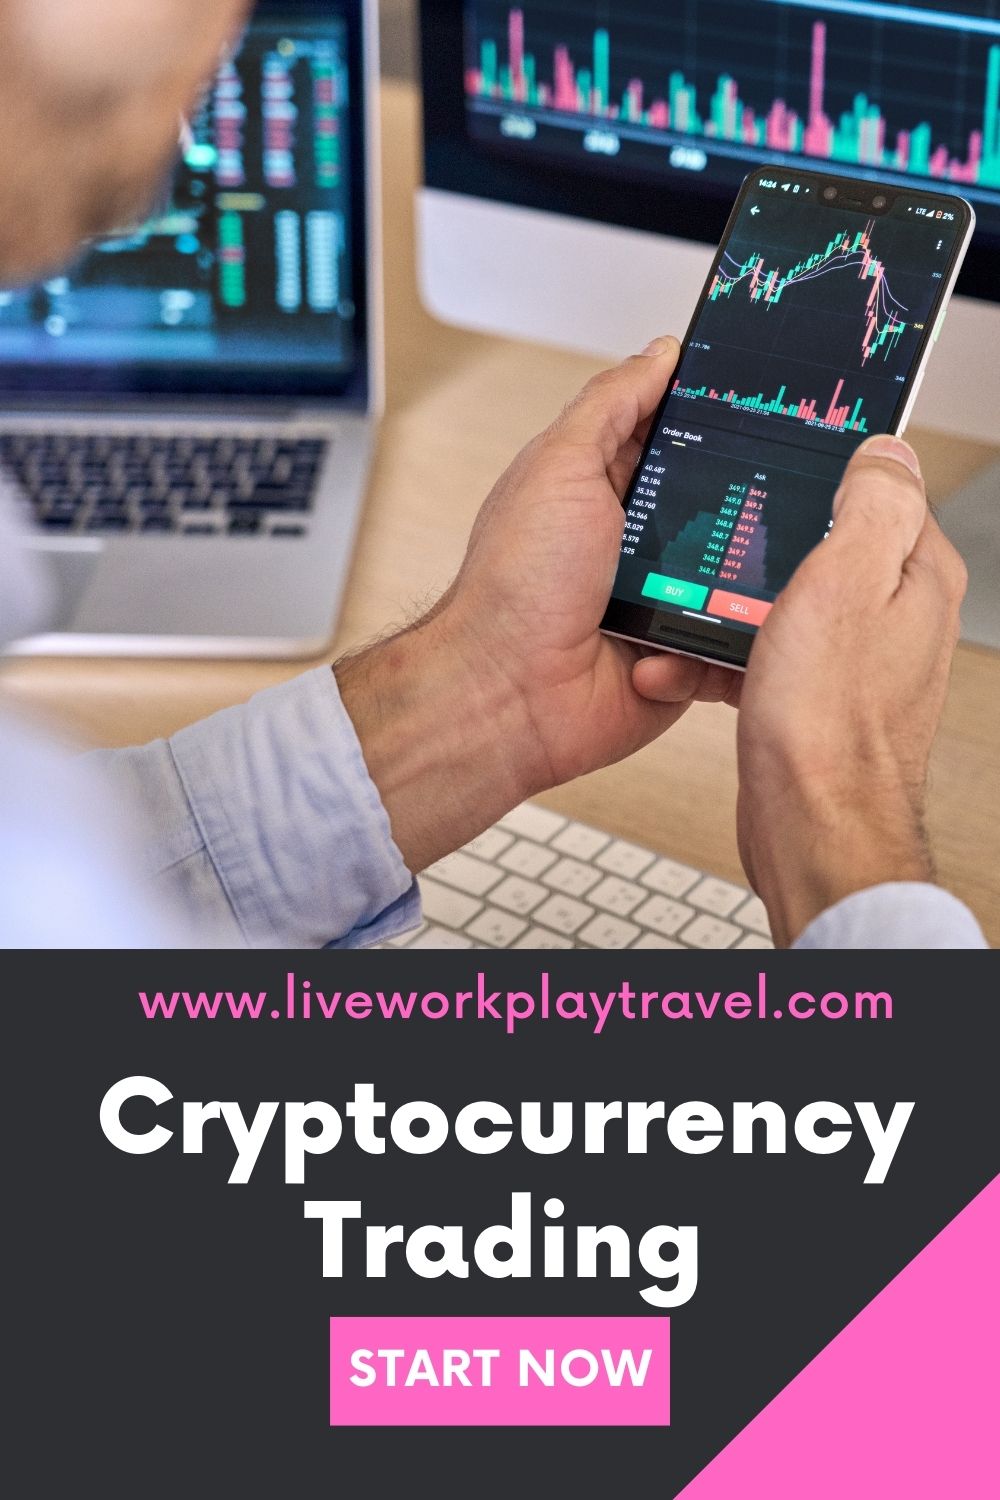 Cryptocurrency Is Becoming A Job People Can Do From Their Phone Or Computer While They Live Work Play Travel the World.